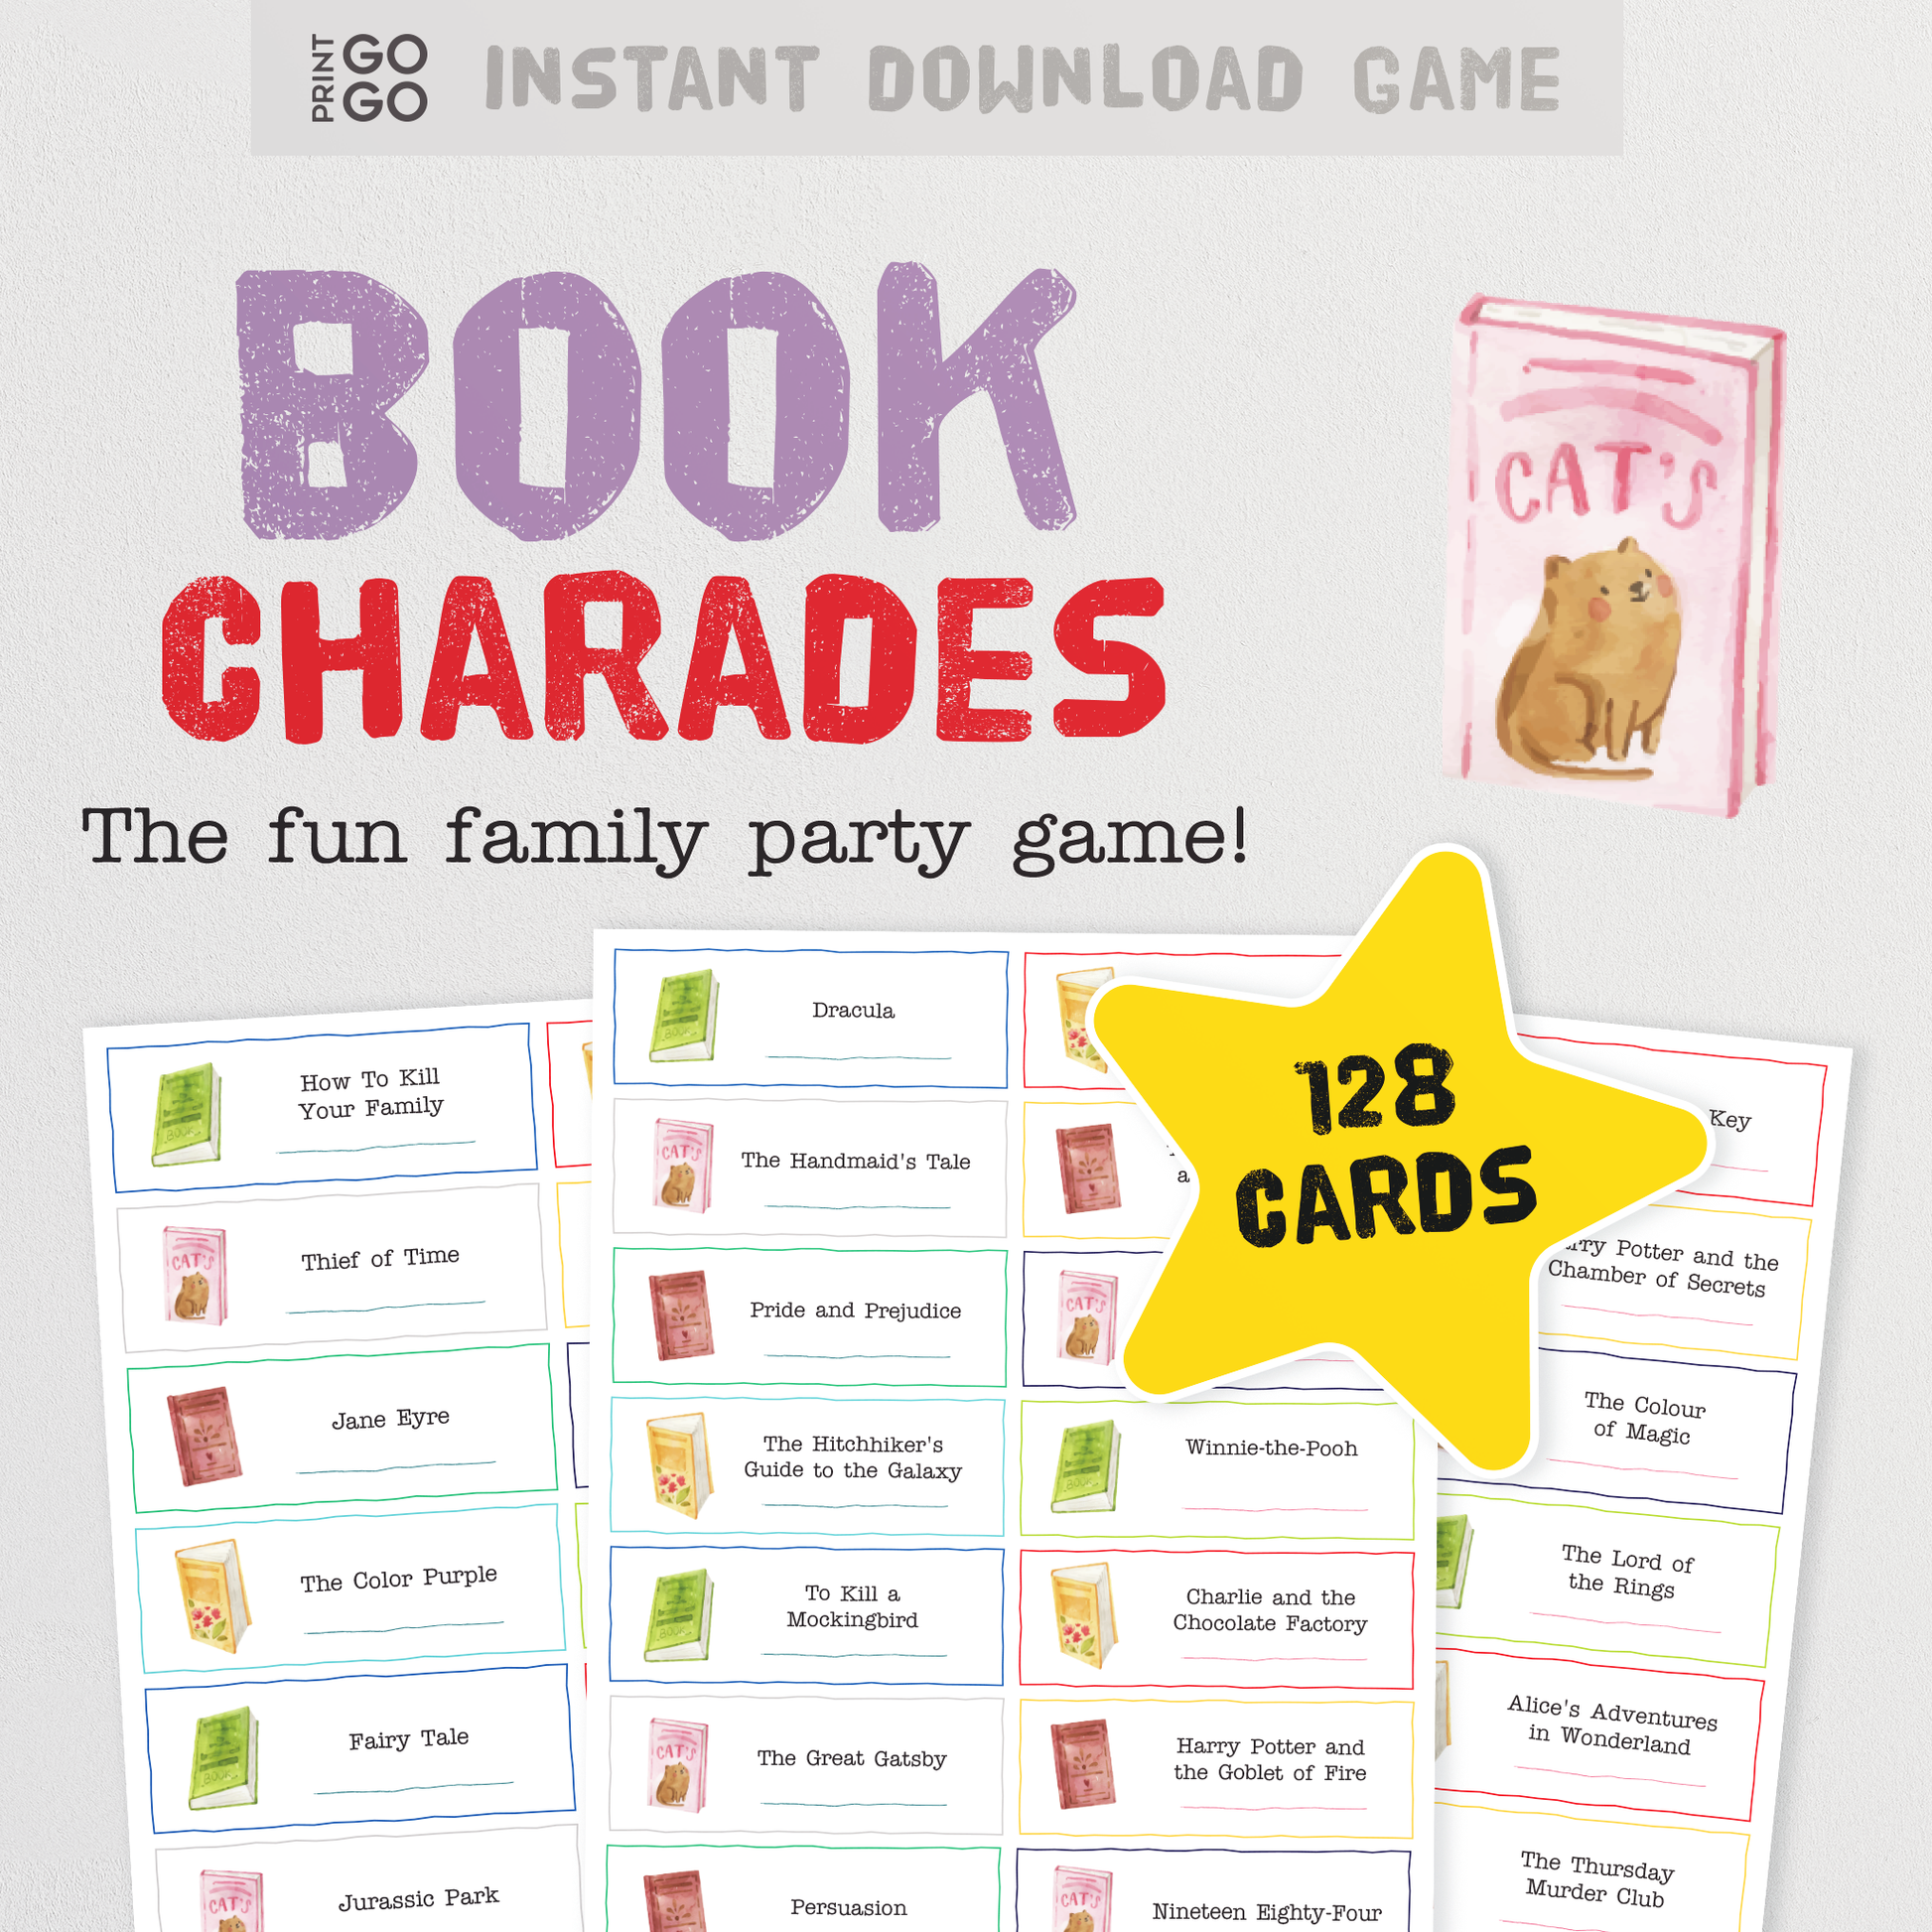 Book Charade Cards - The Party Game of Acting Out and Guessing Book Titles